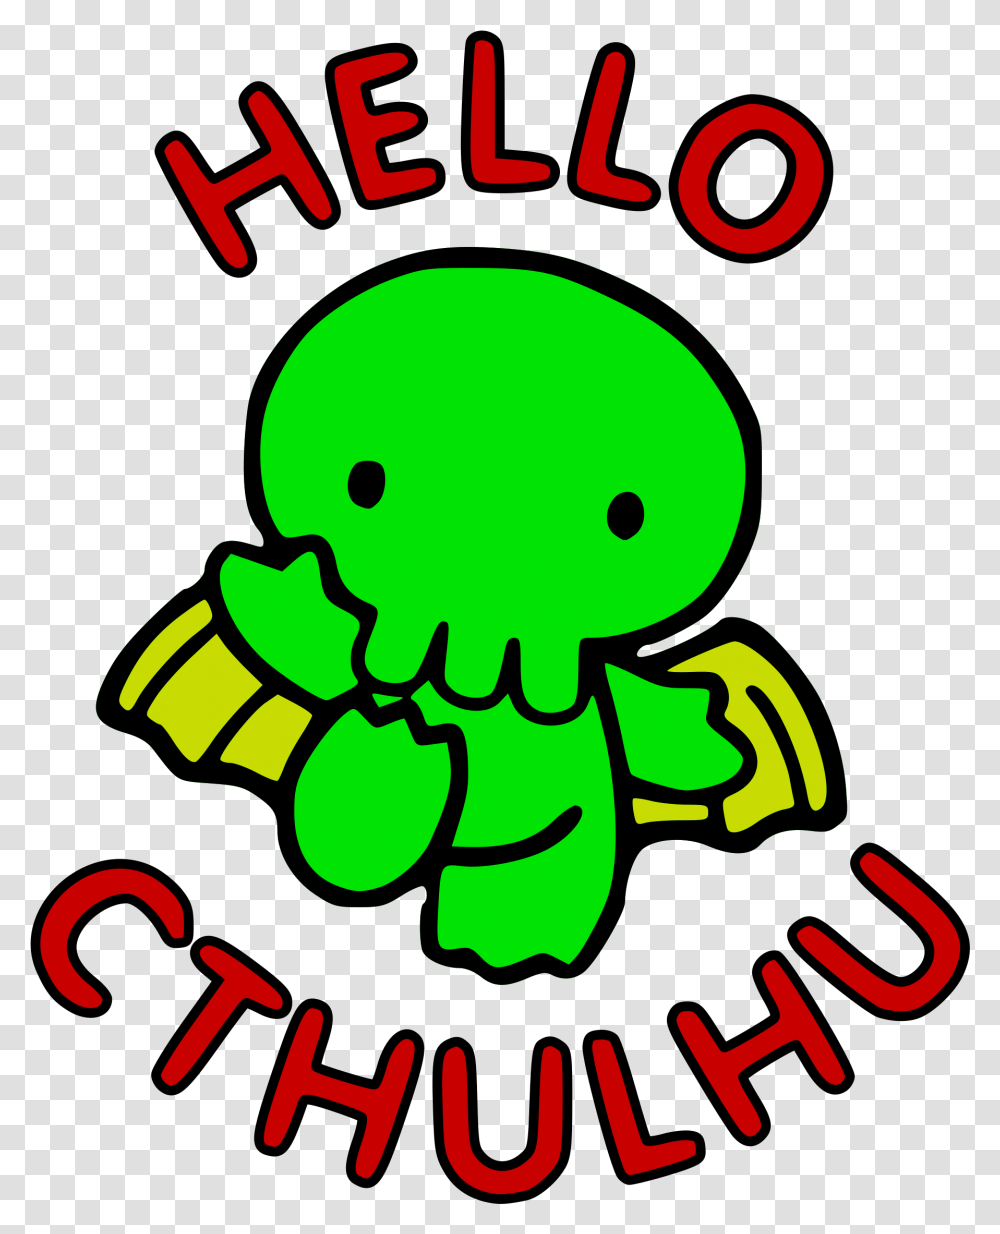 Download This Free Icons Design Of Hello Cthulhu, Poster, Advertisement, Symbol Transparent Png